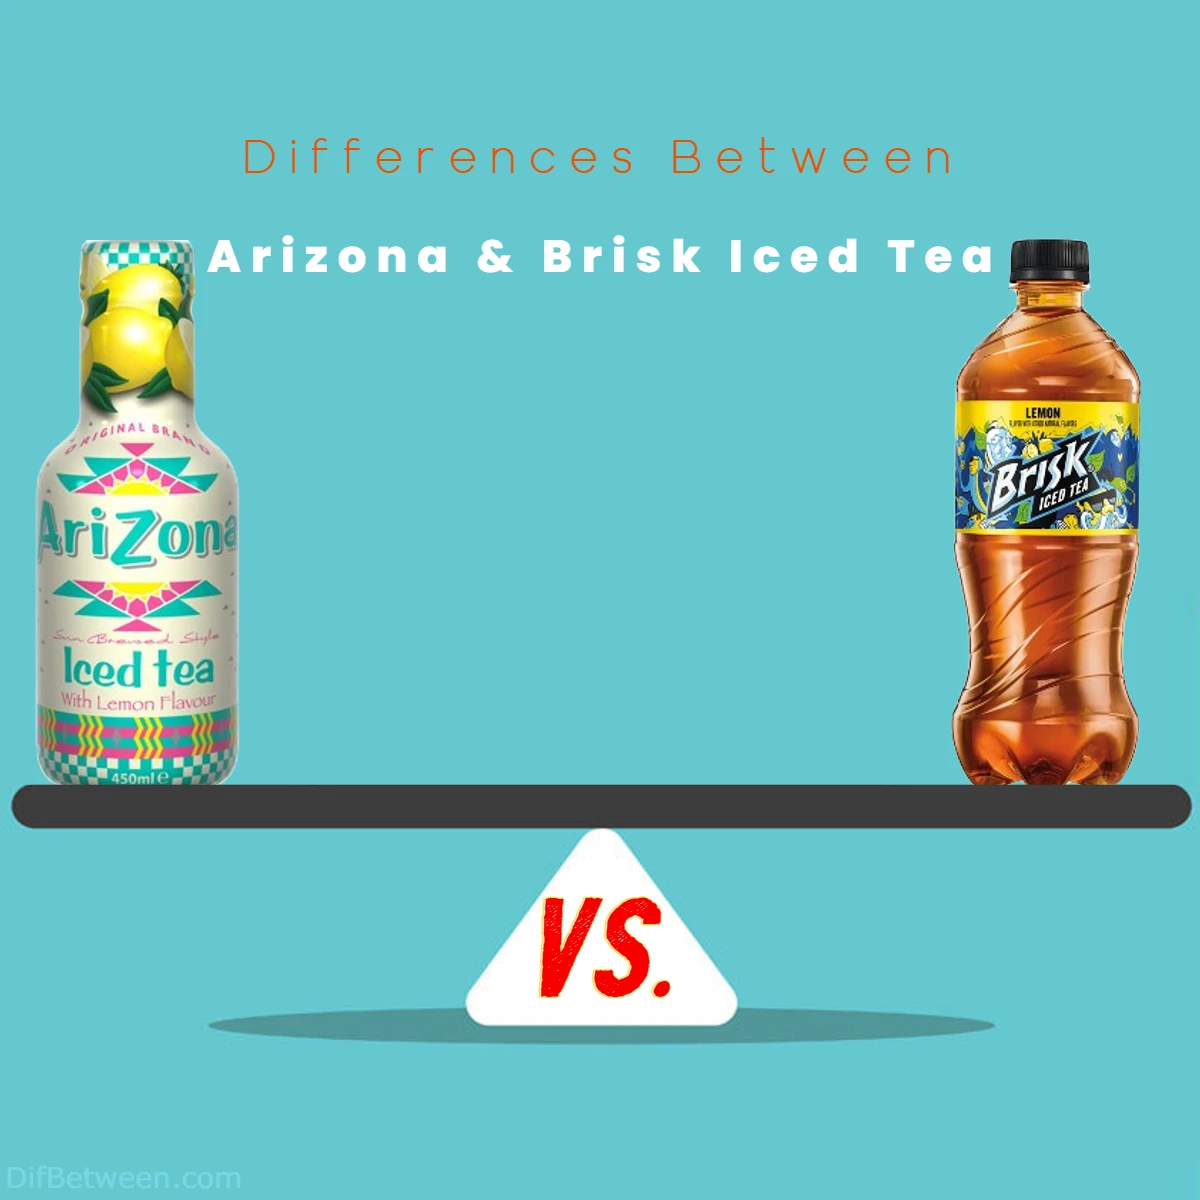 Difference Between Brisk Iced Tea and Arizona